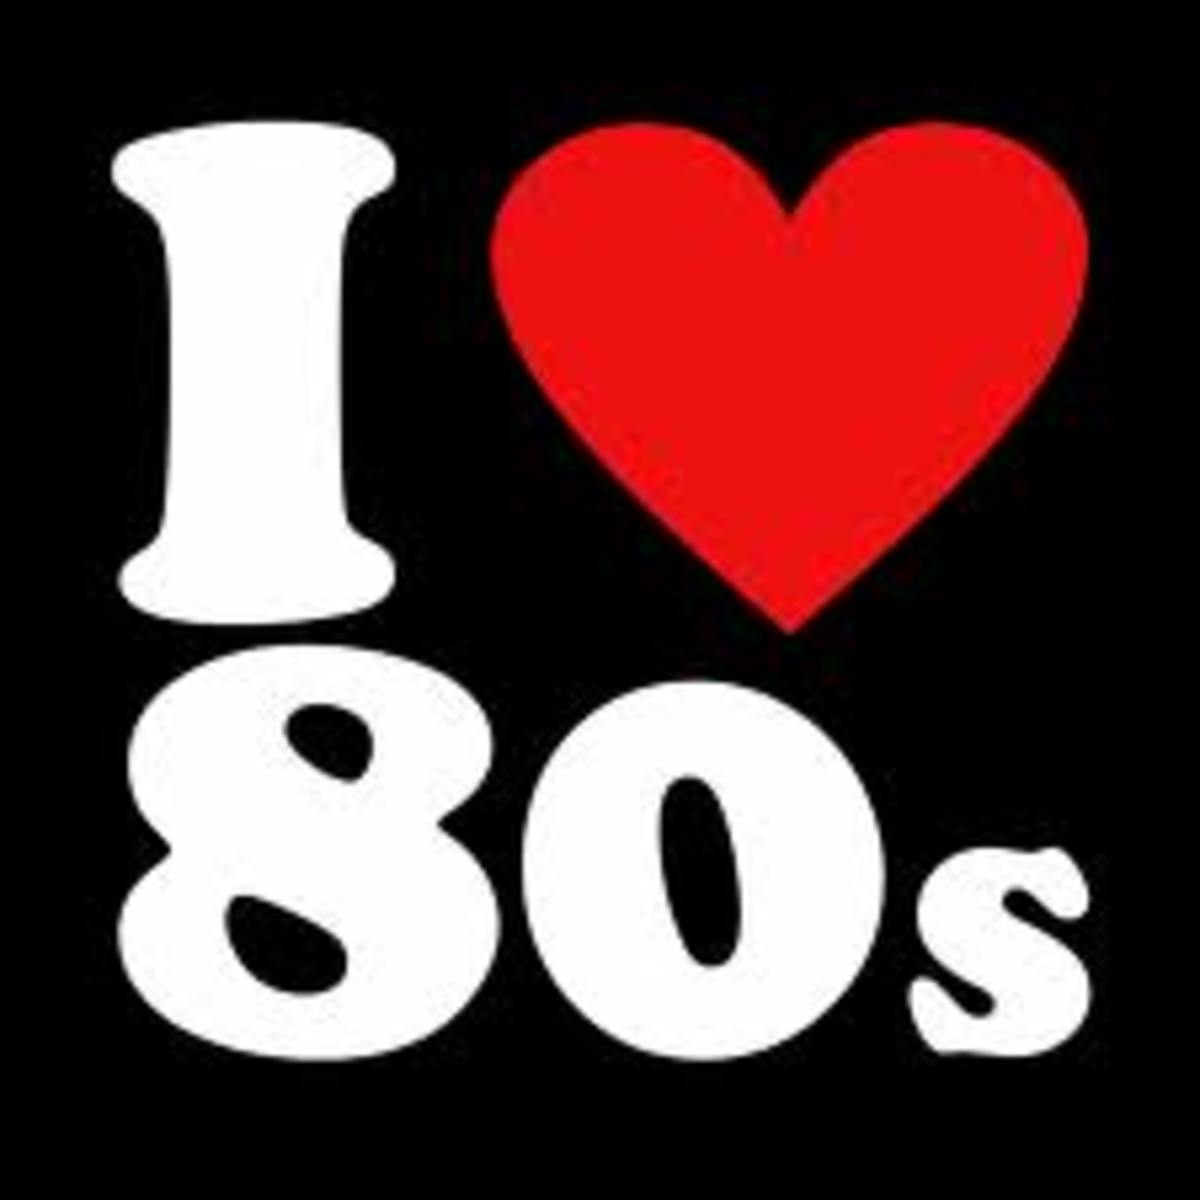 Remember the 80's? Cartoons, Toys, Commercials, Movies and Fashion.